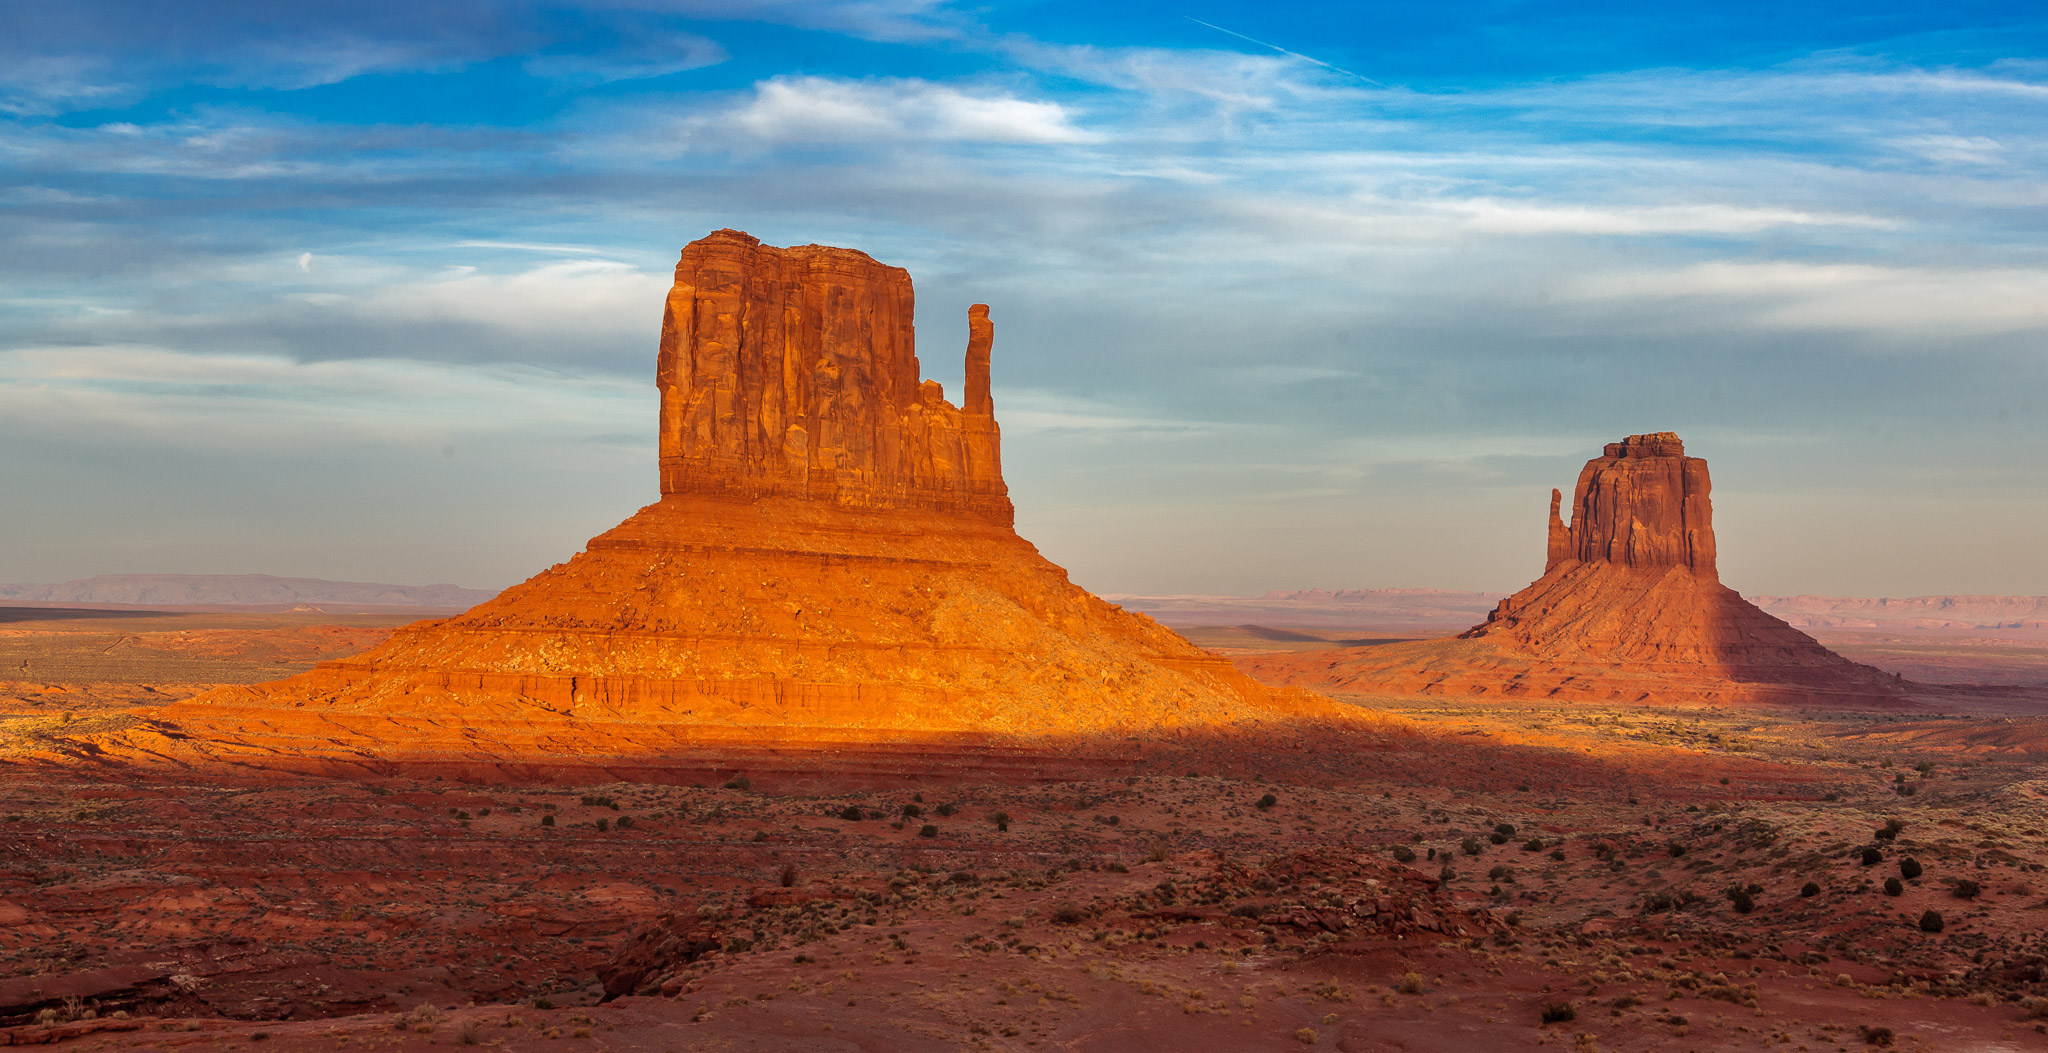 Sunset on the Mittens, Monument Valley